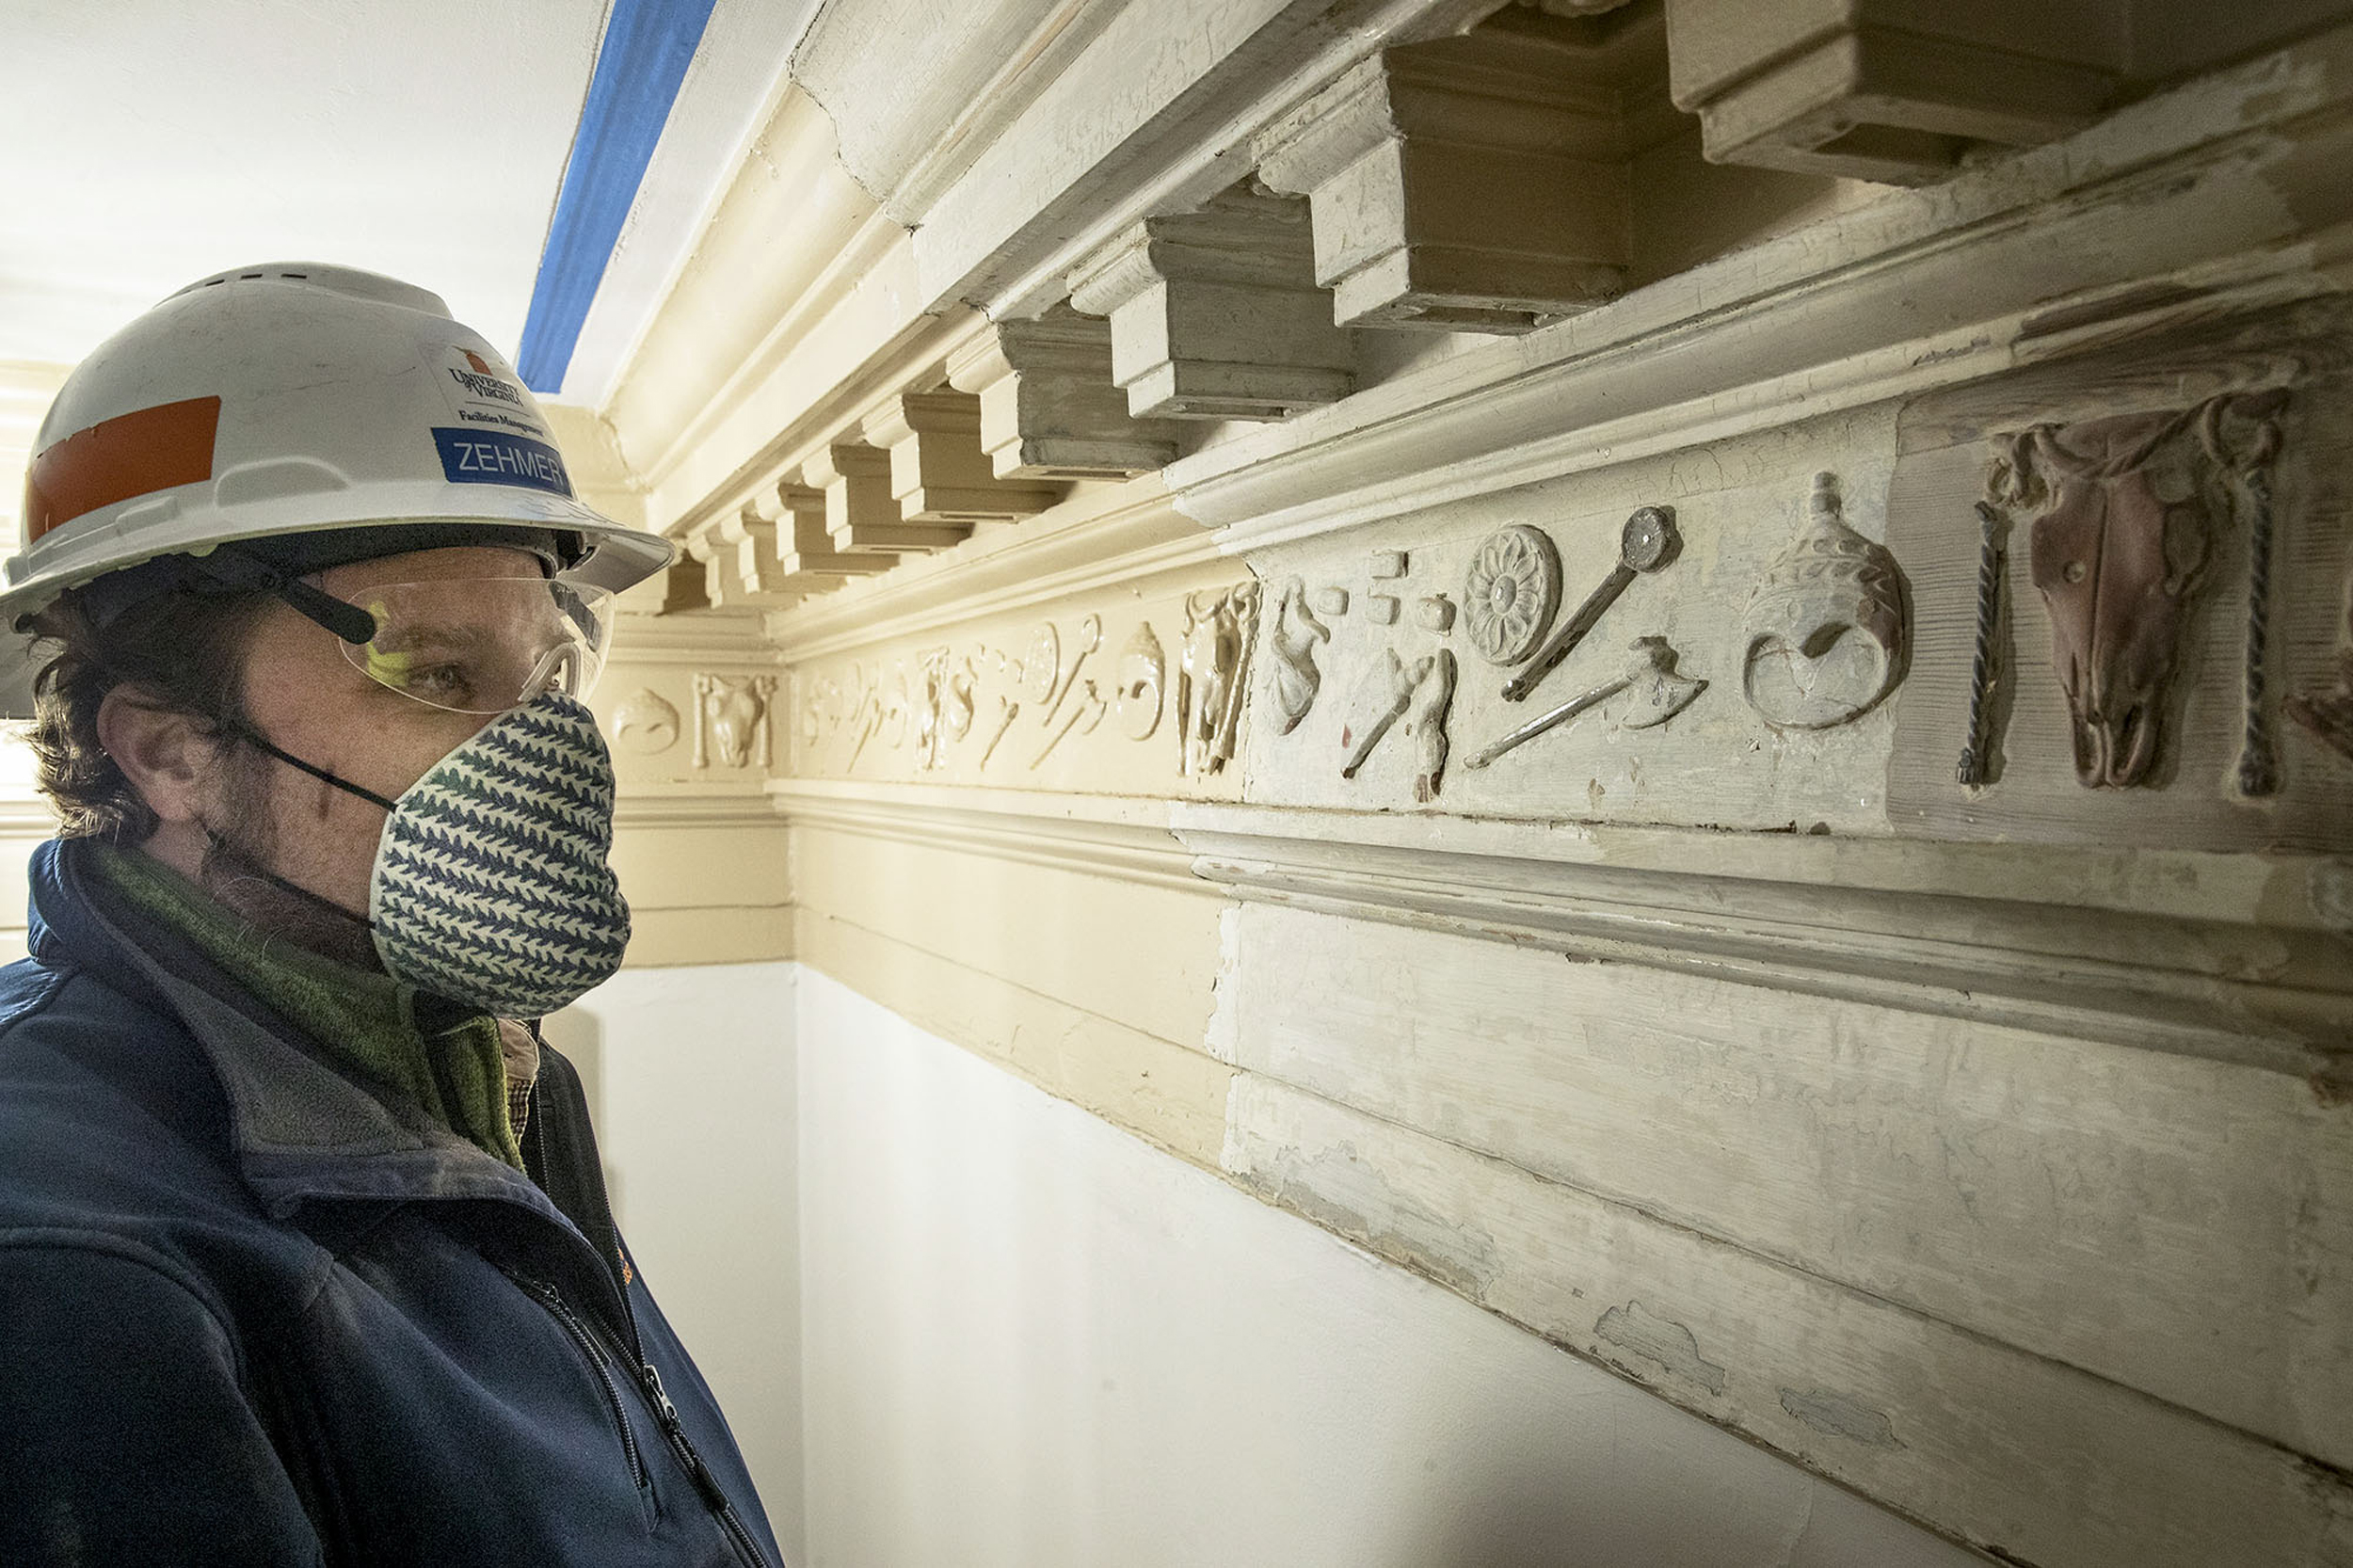 James Zehmer inspects the entablature that has intricate designs on it